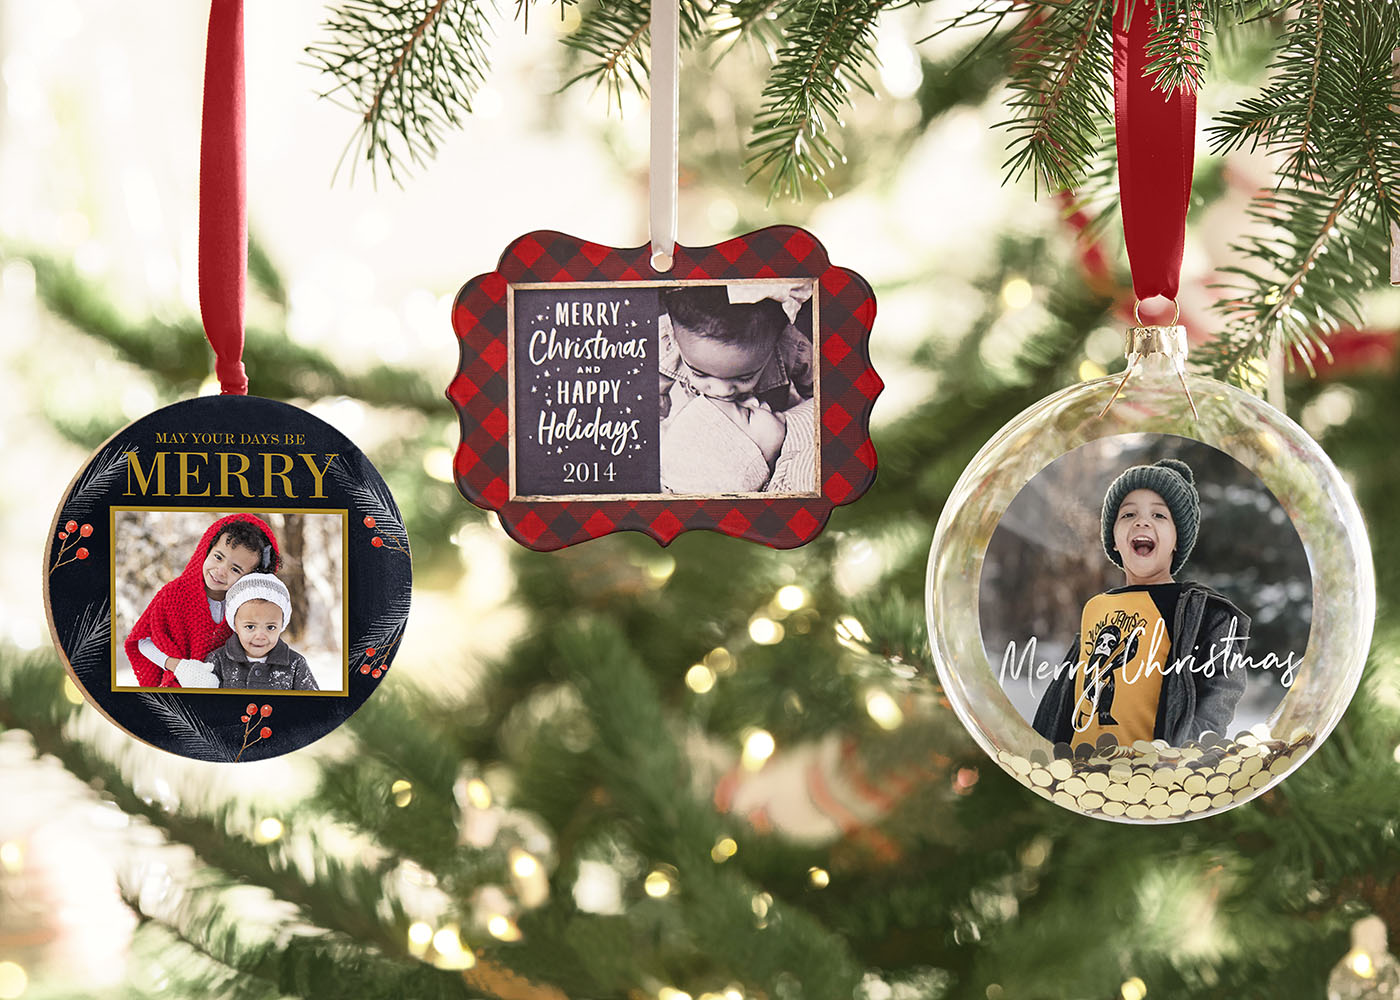 Personalized ornaments hanging on a tree. 